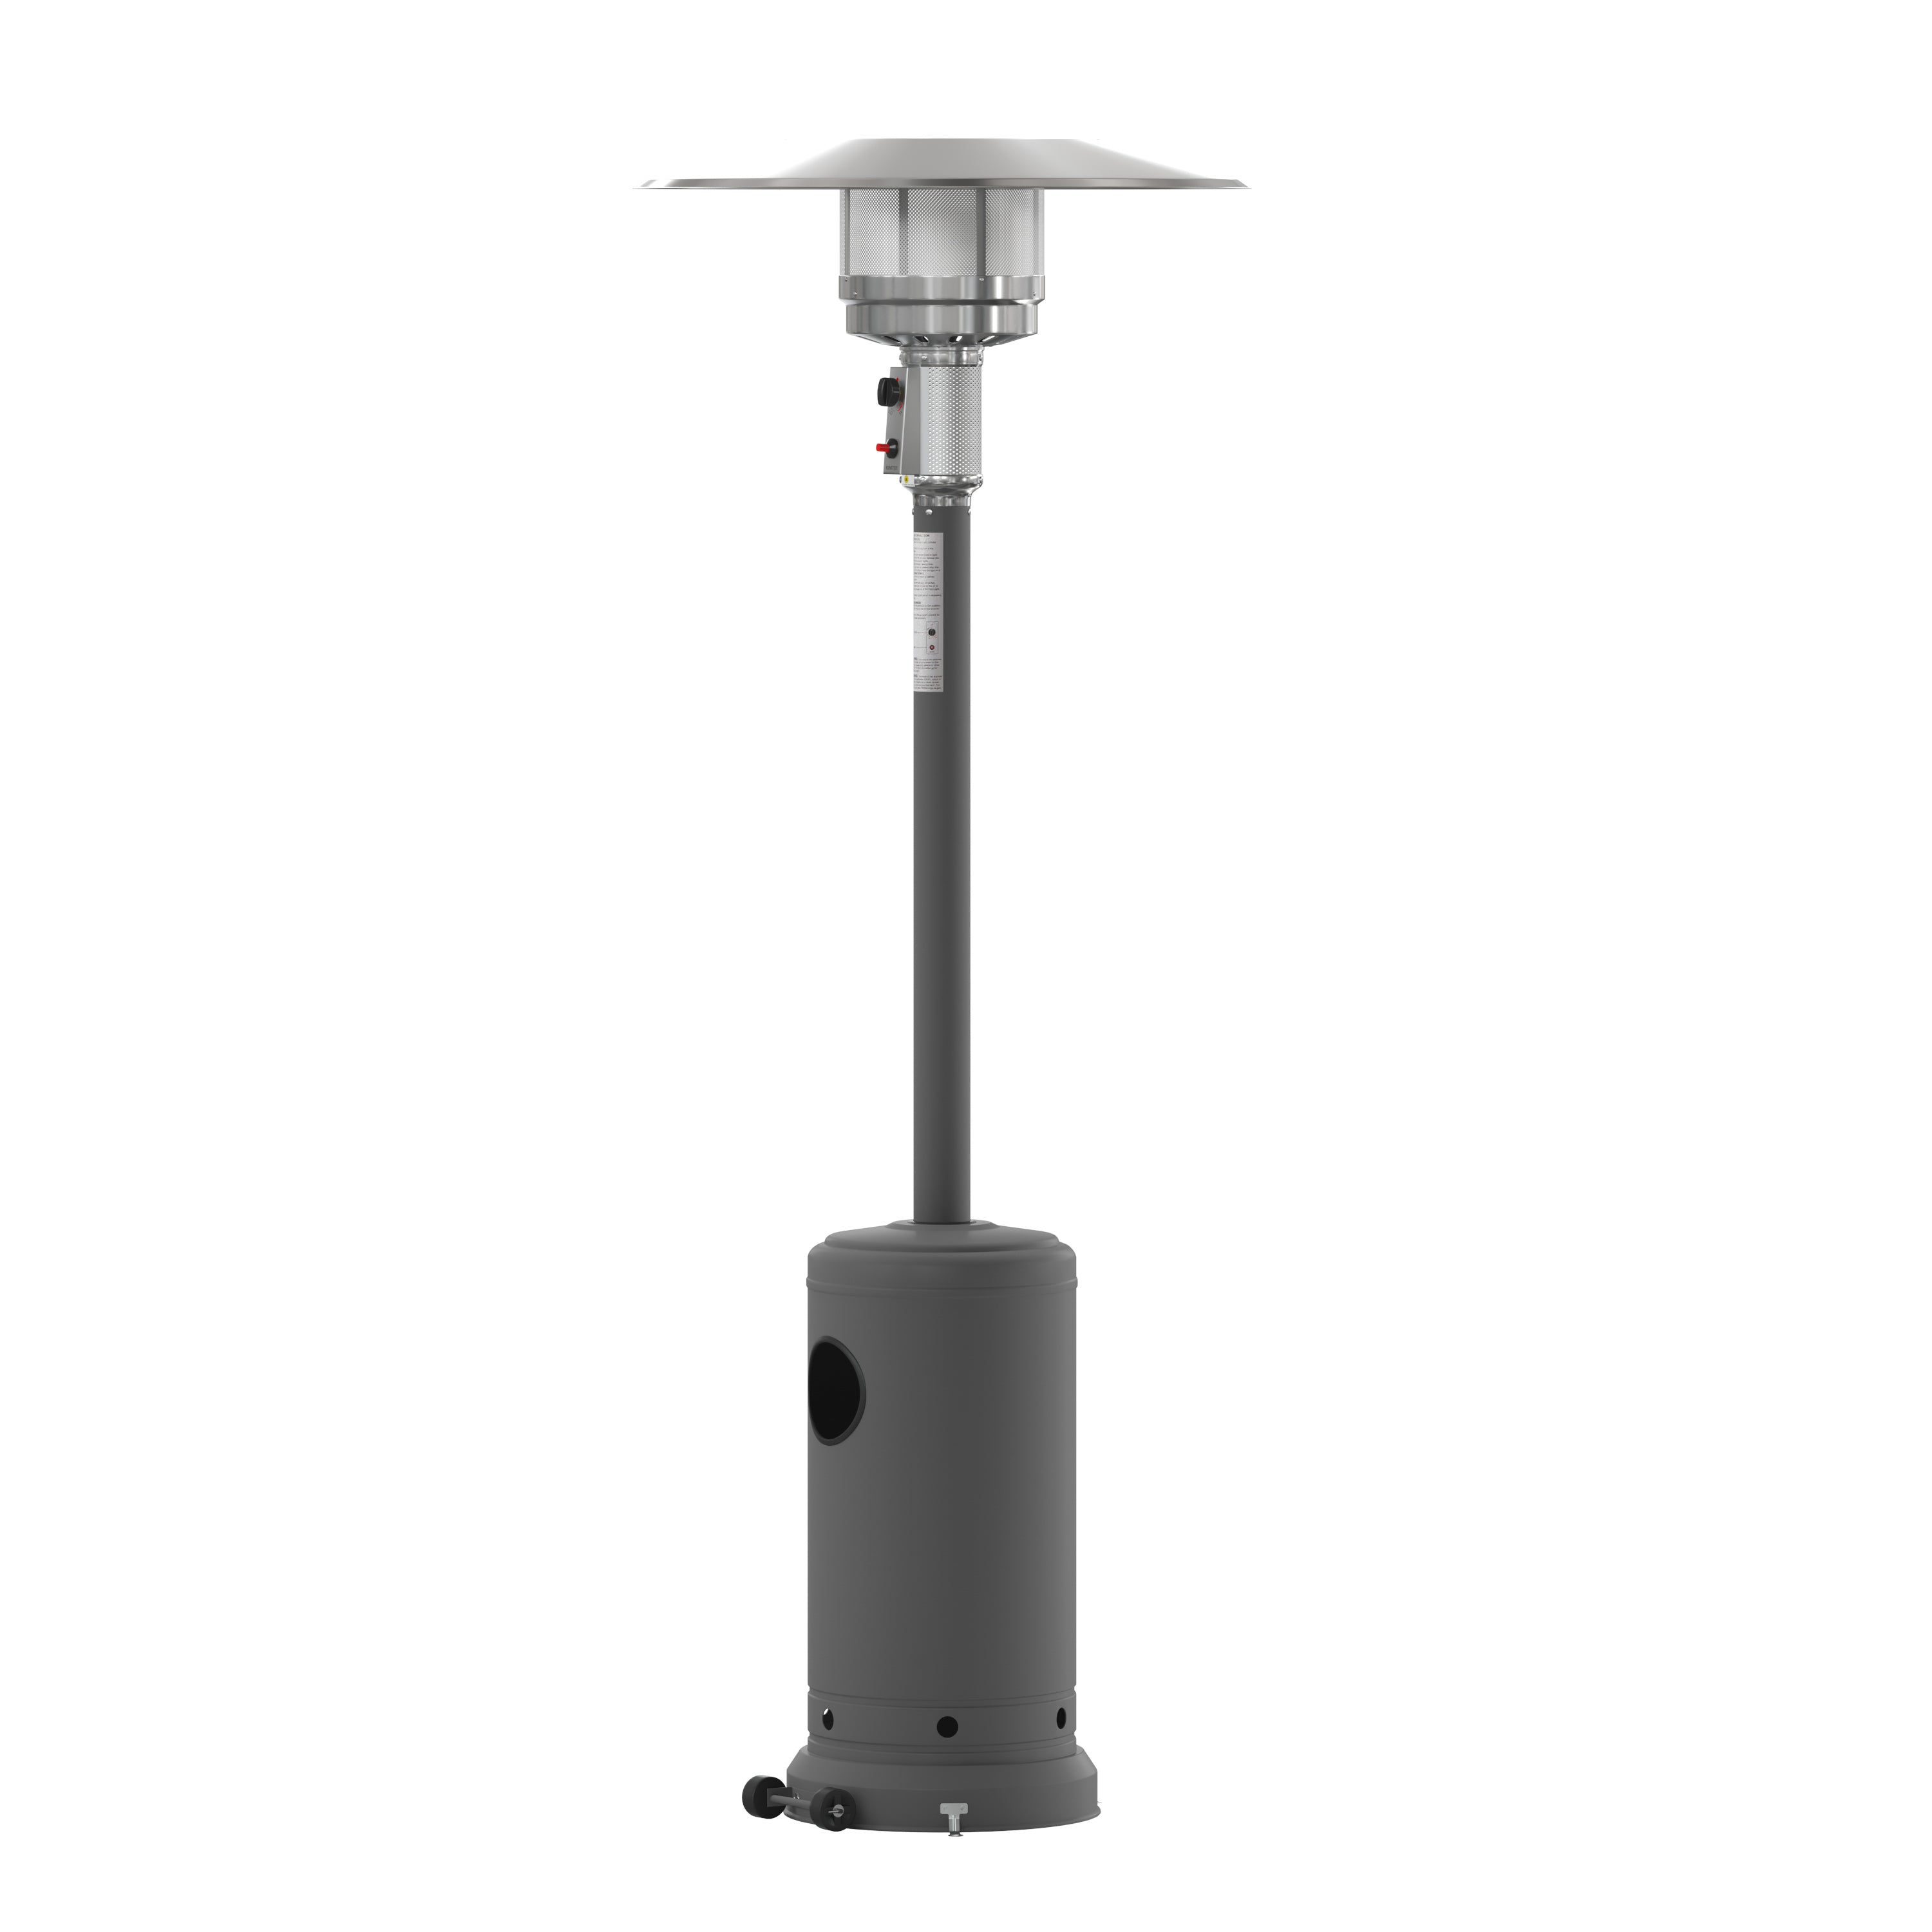 Sol Patio Outdoor Heating-Stainless Steel 40,000 BTU Propane Heater with Wheels for Commercial & Residential Use-7.5 Feet Tall-Portable Patio Heaters-Flash Furniture-Wall2Wall Furnishings